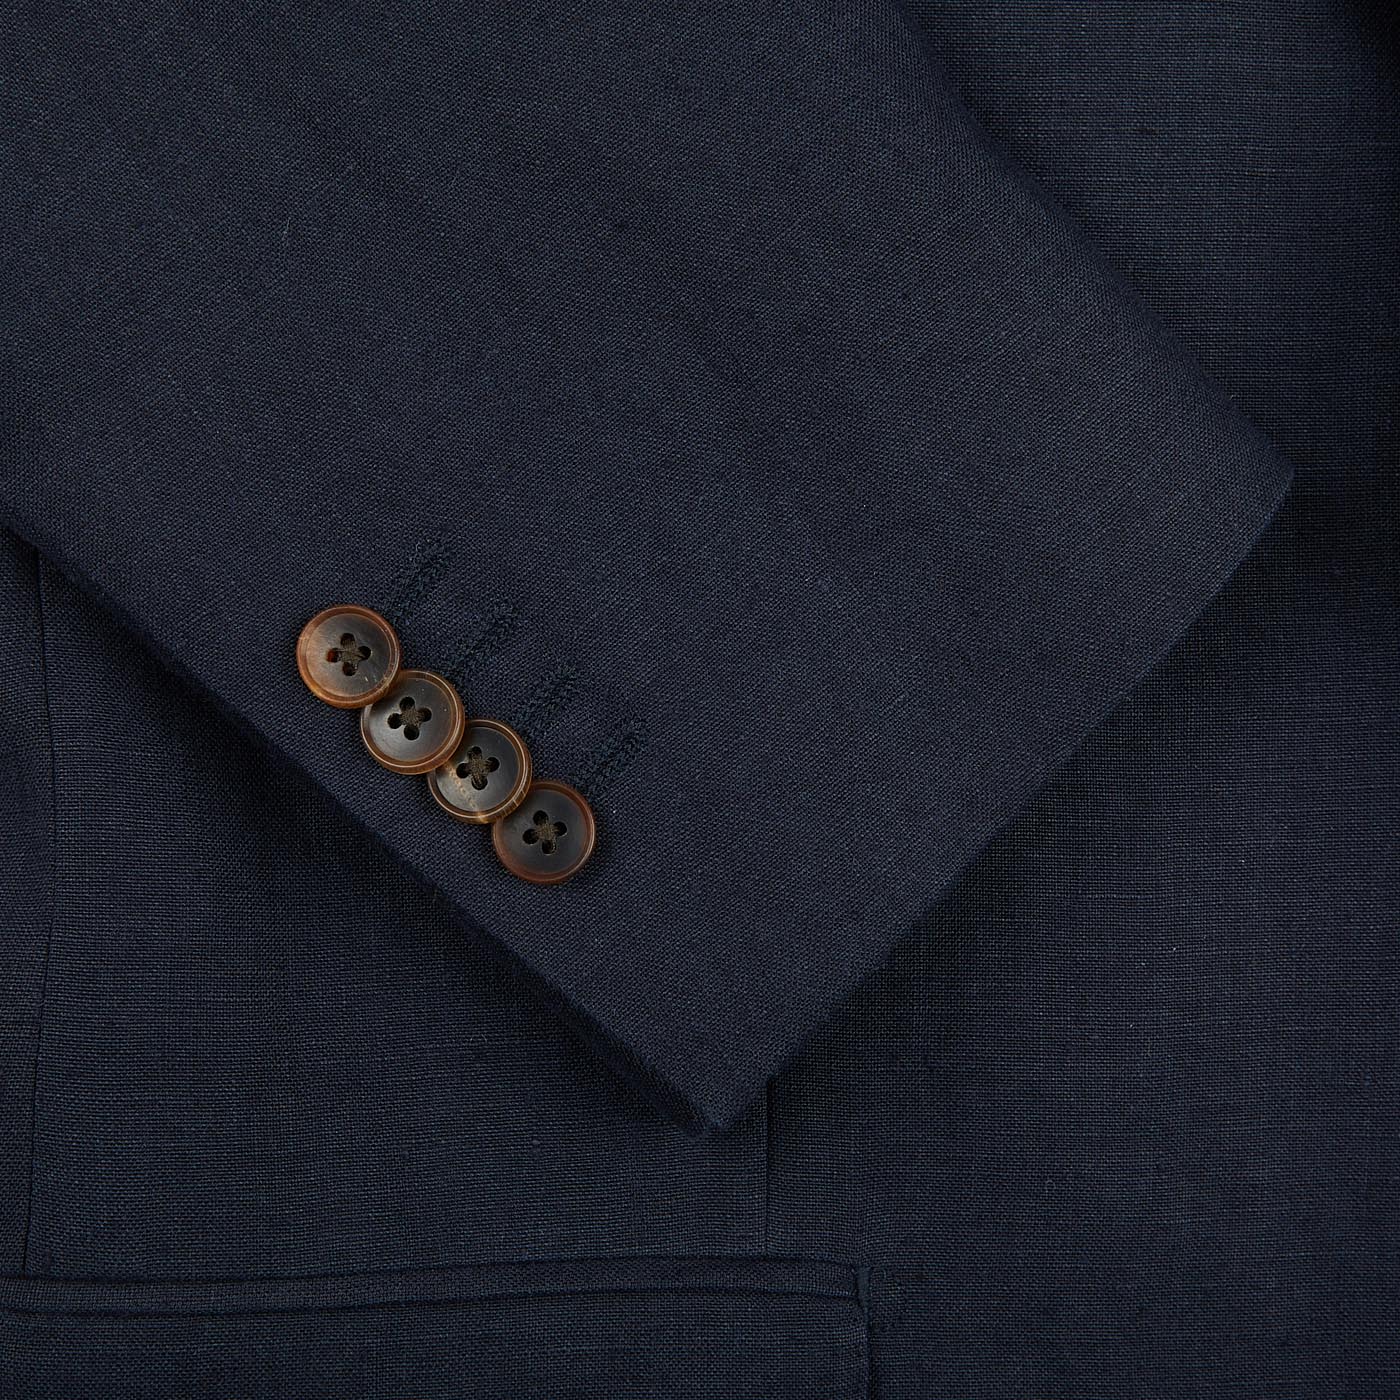 A close up of a Baltzar Sartorial Navy Blue Pure Linen Suit Jacket with buttons.